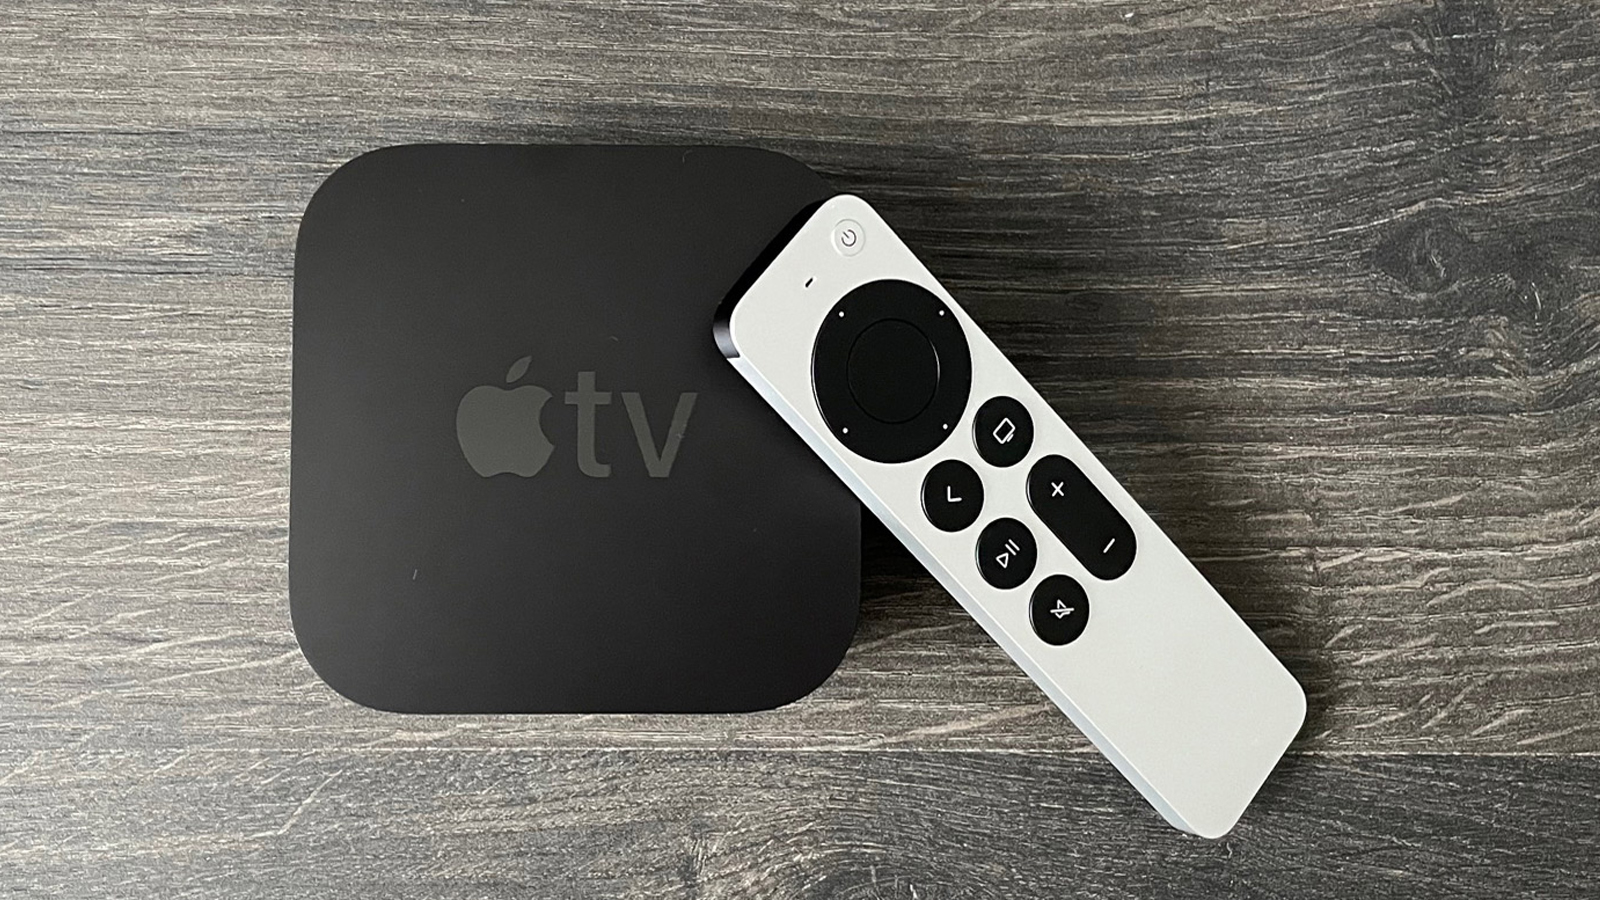 Apple TV 4K 2021 and its remote on a table